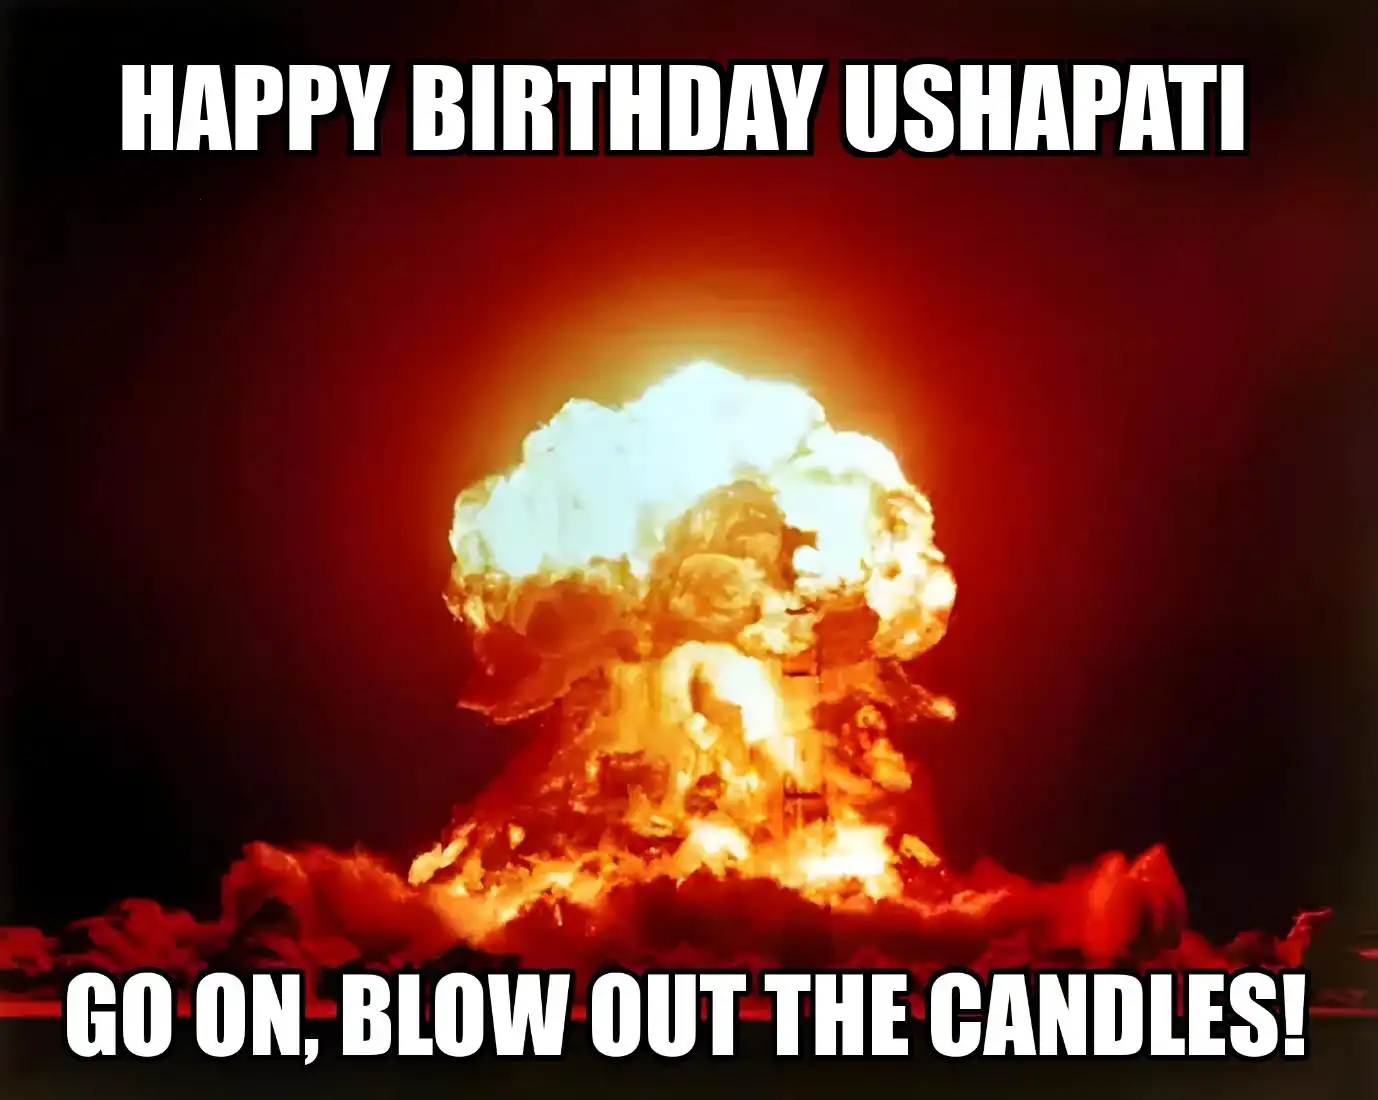 Happy Birthday Ushapati Go On Blow Out The Candles Meme